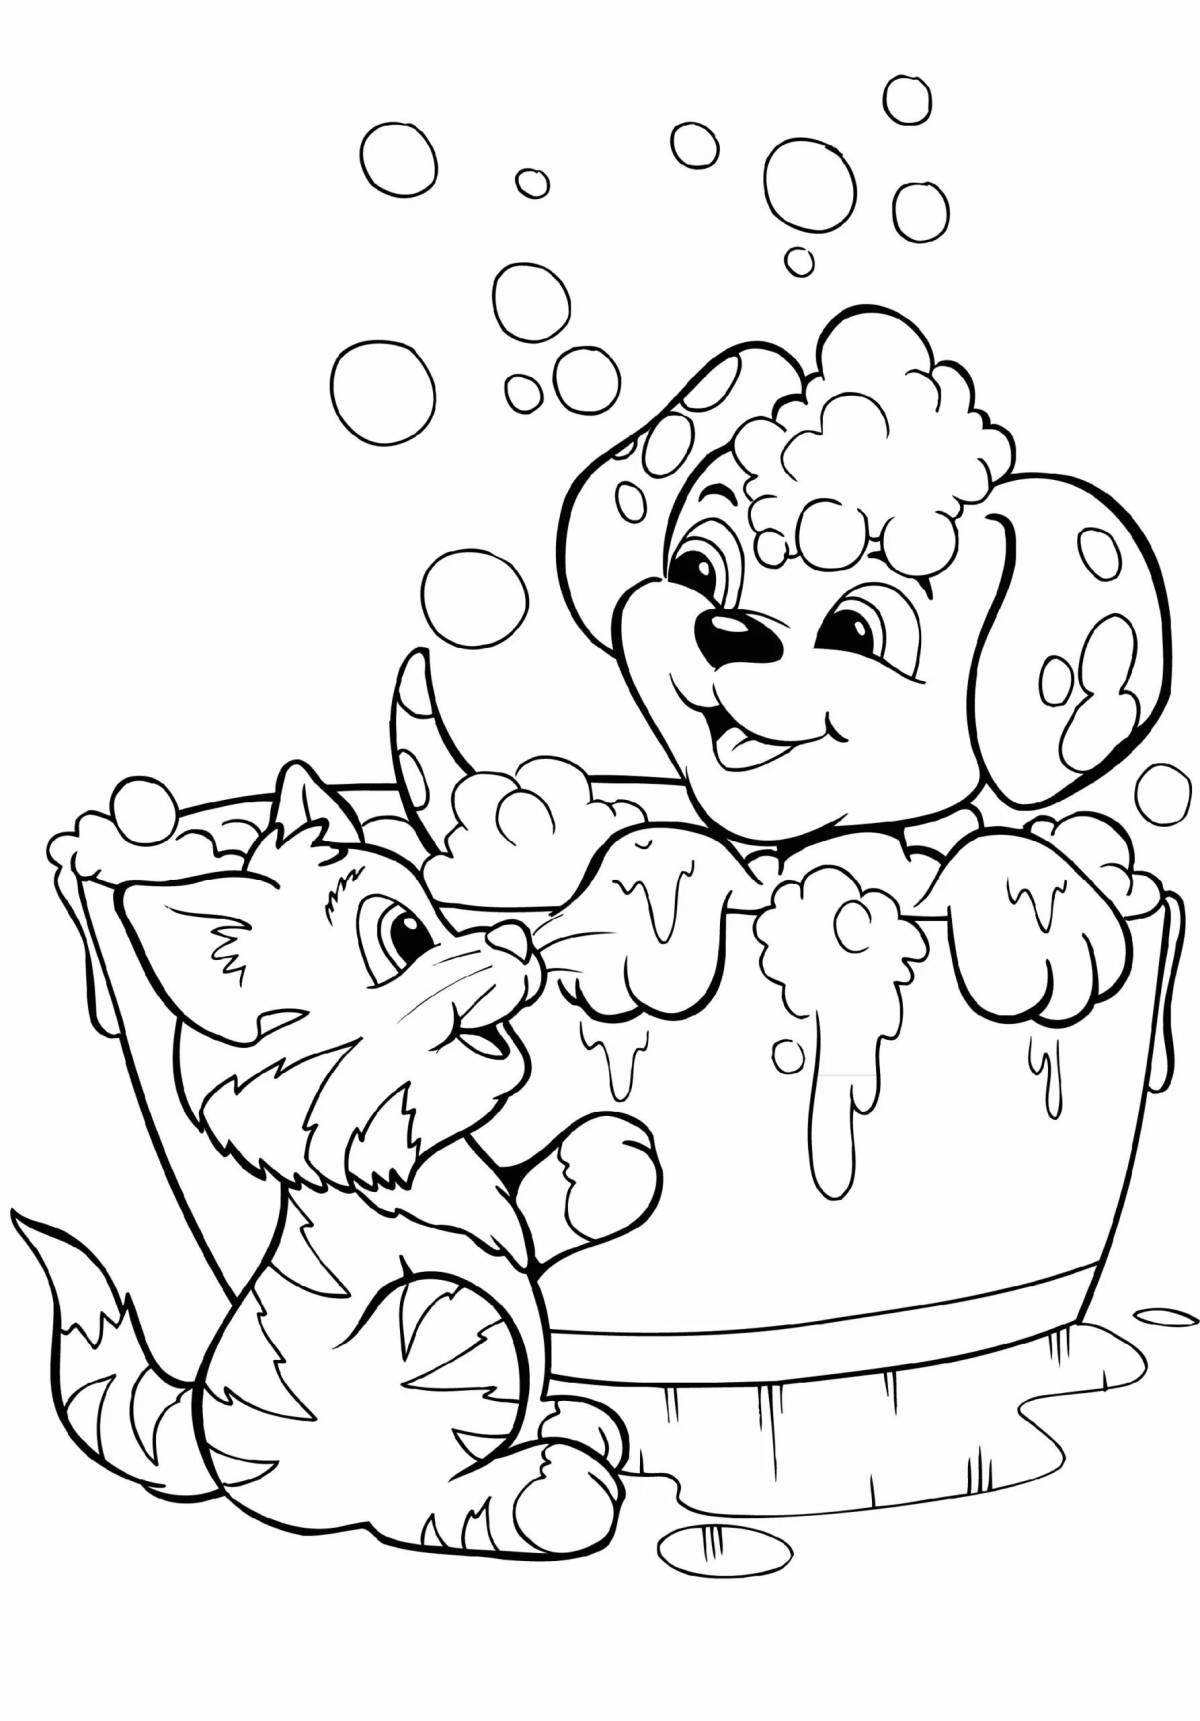 Coloring page violent dog and cat